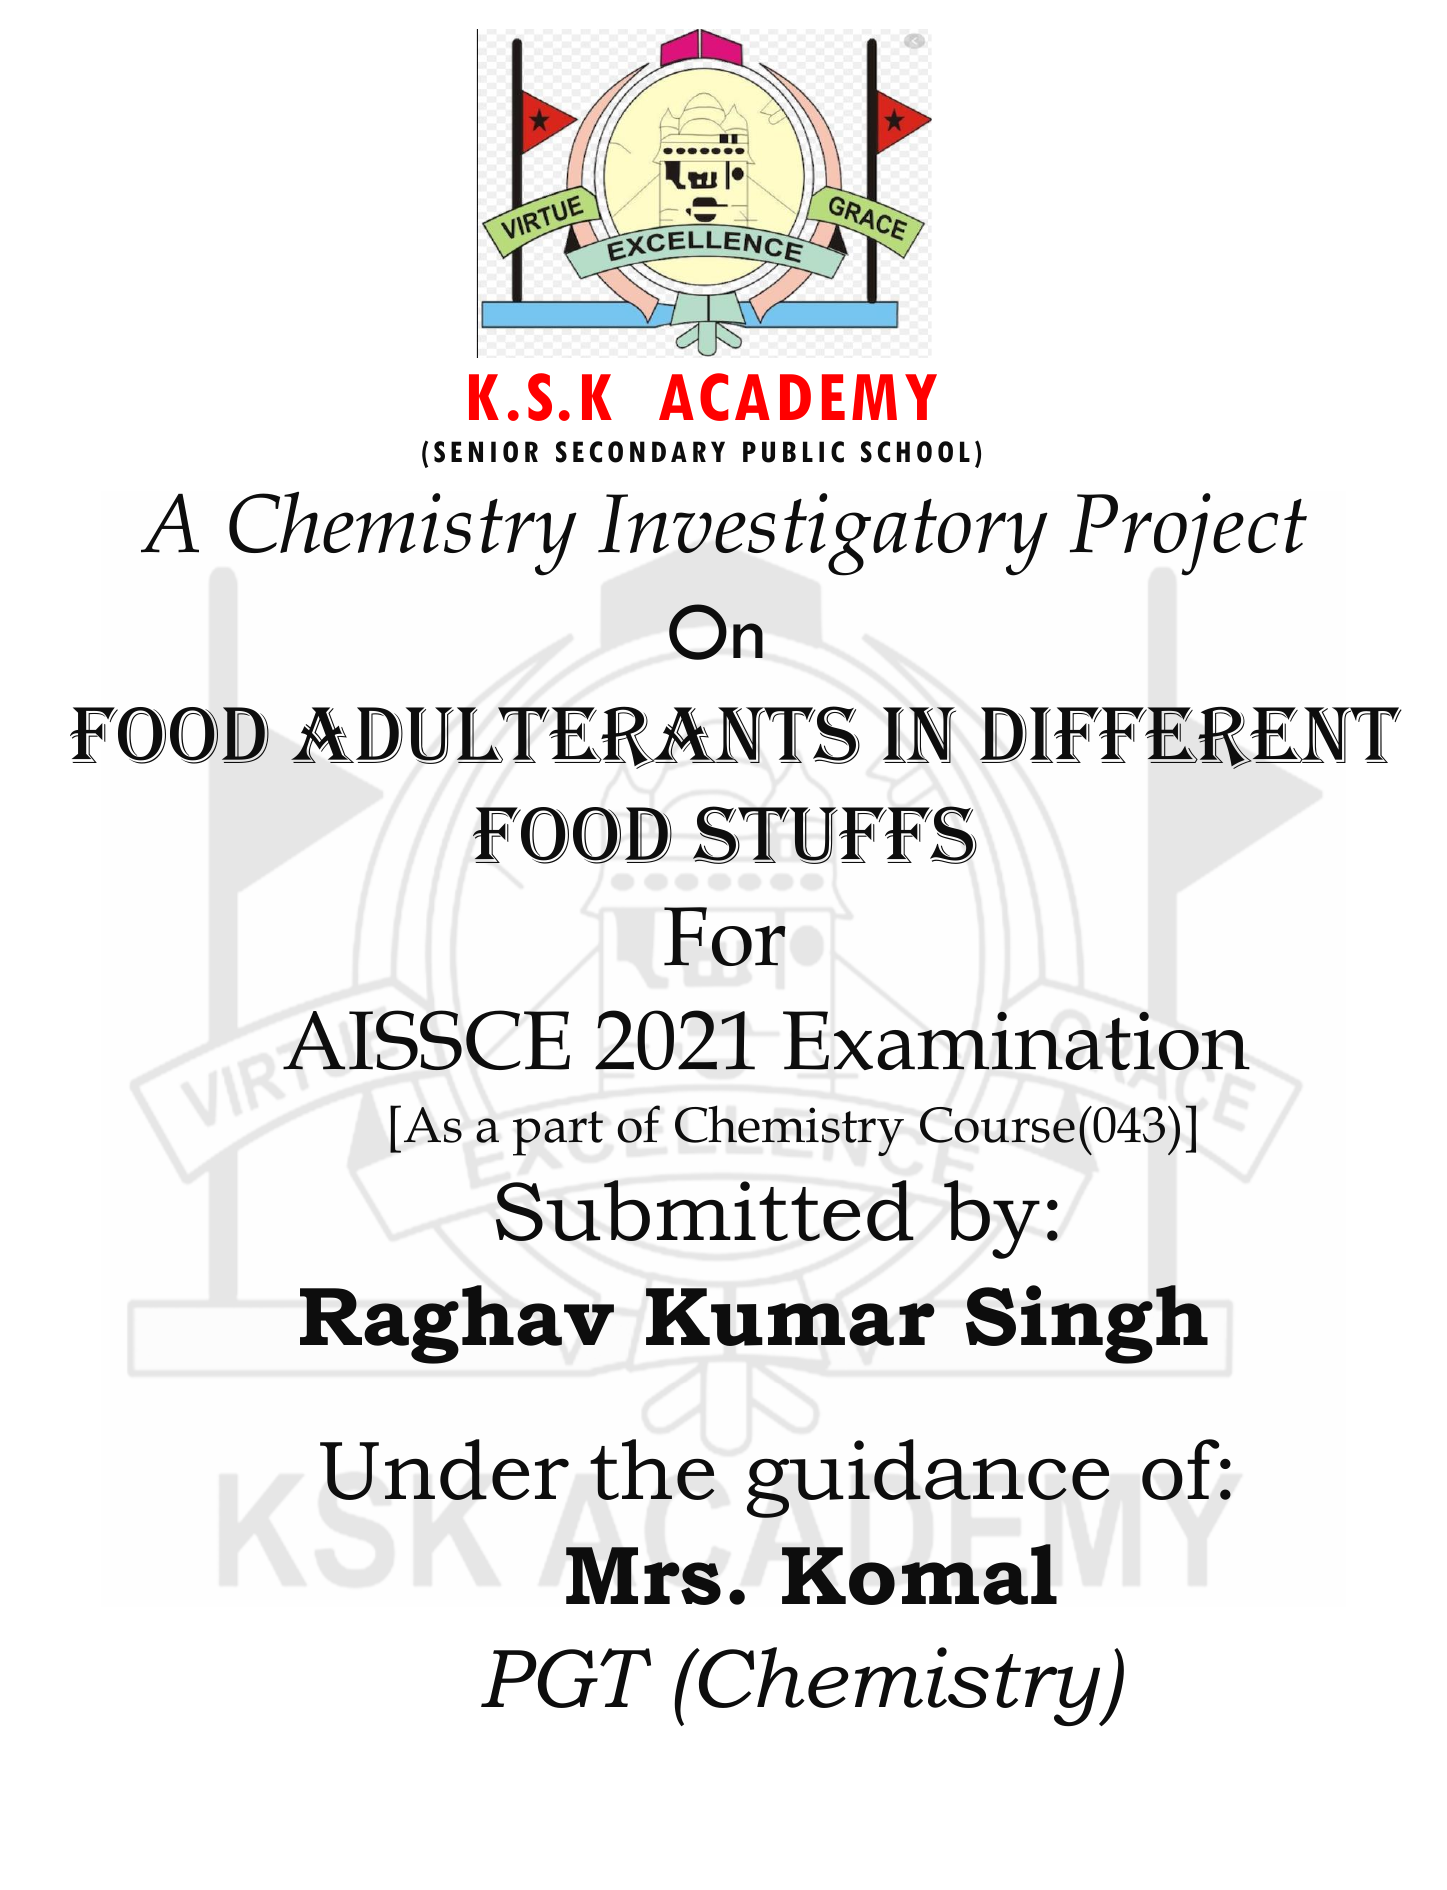 food adulteration ppt